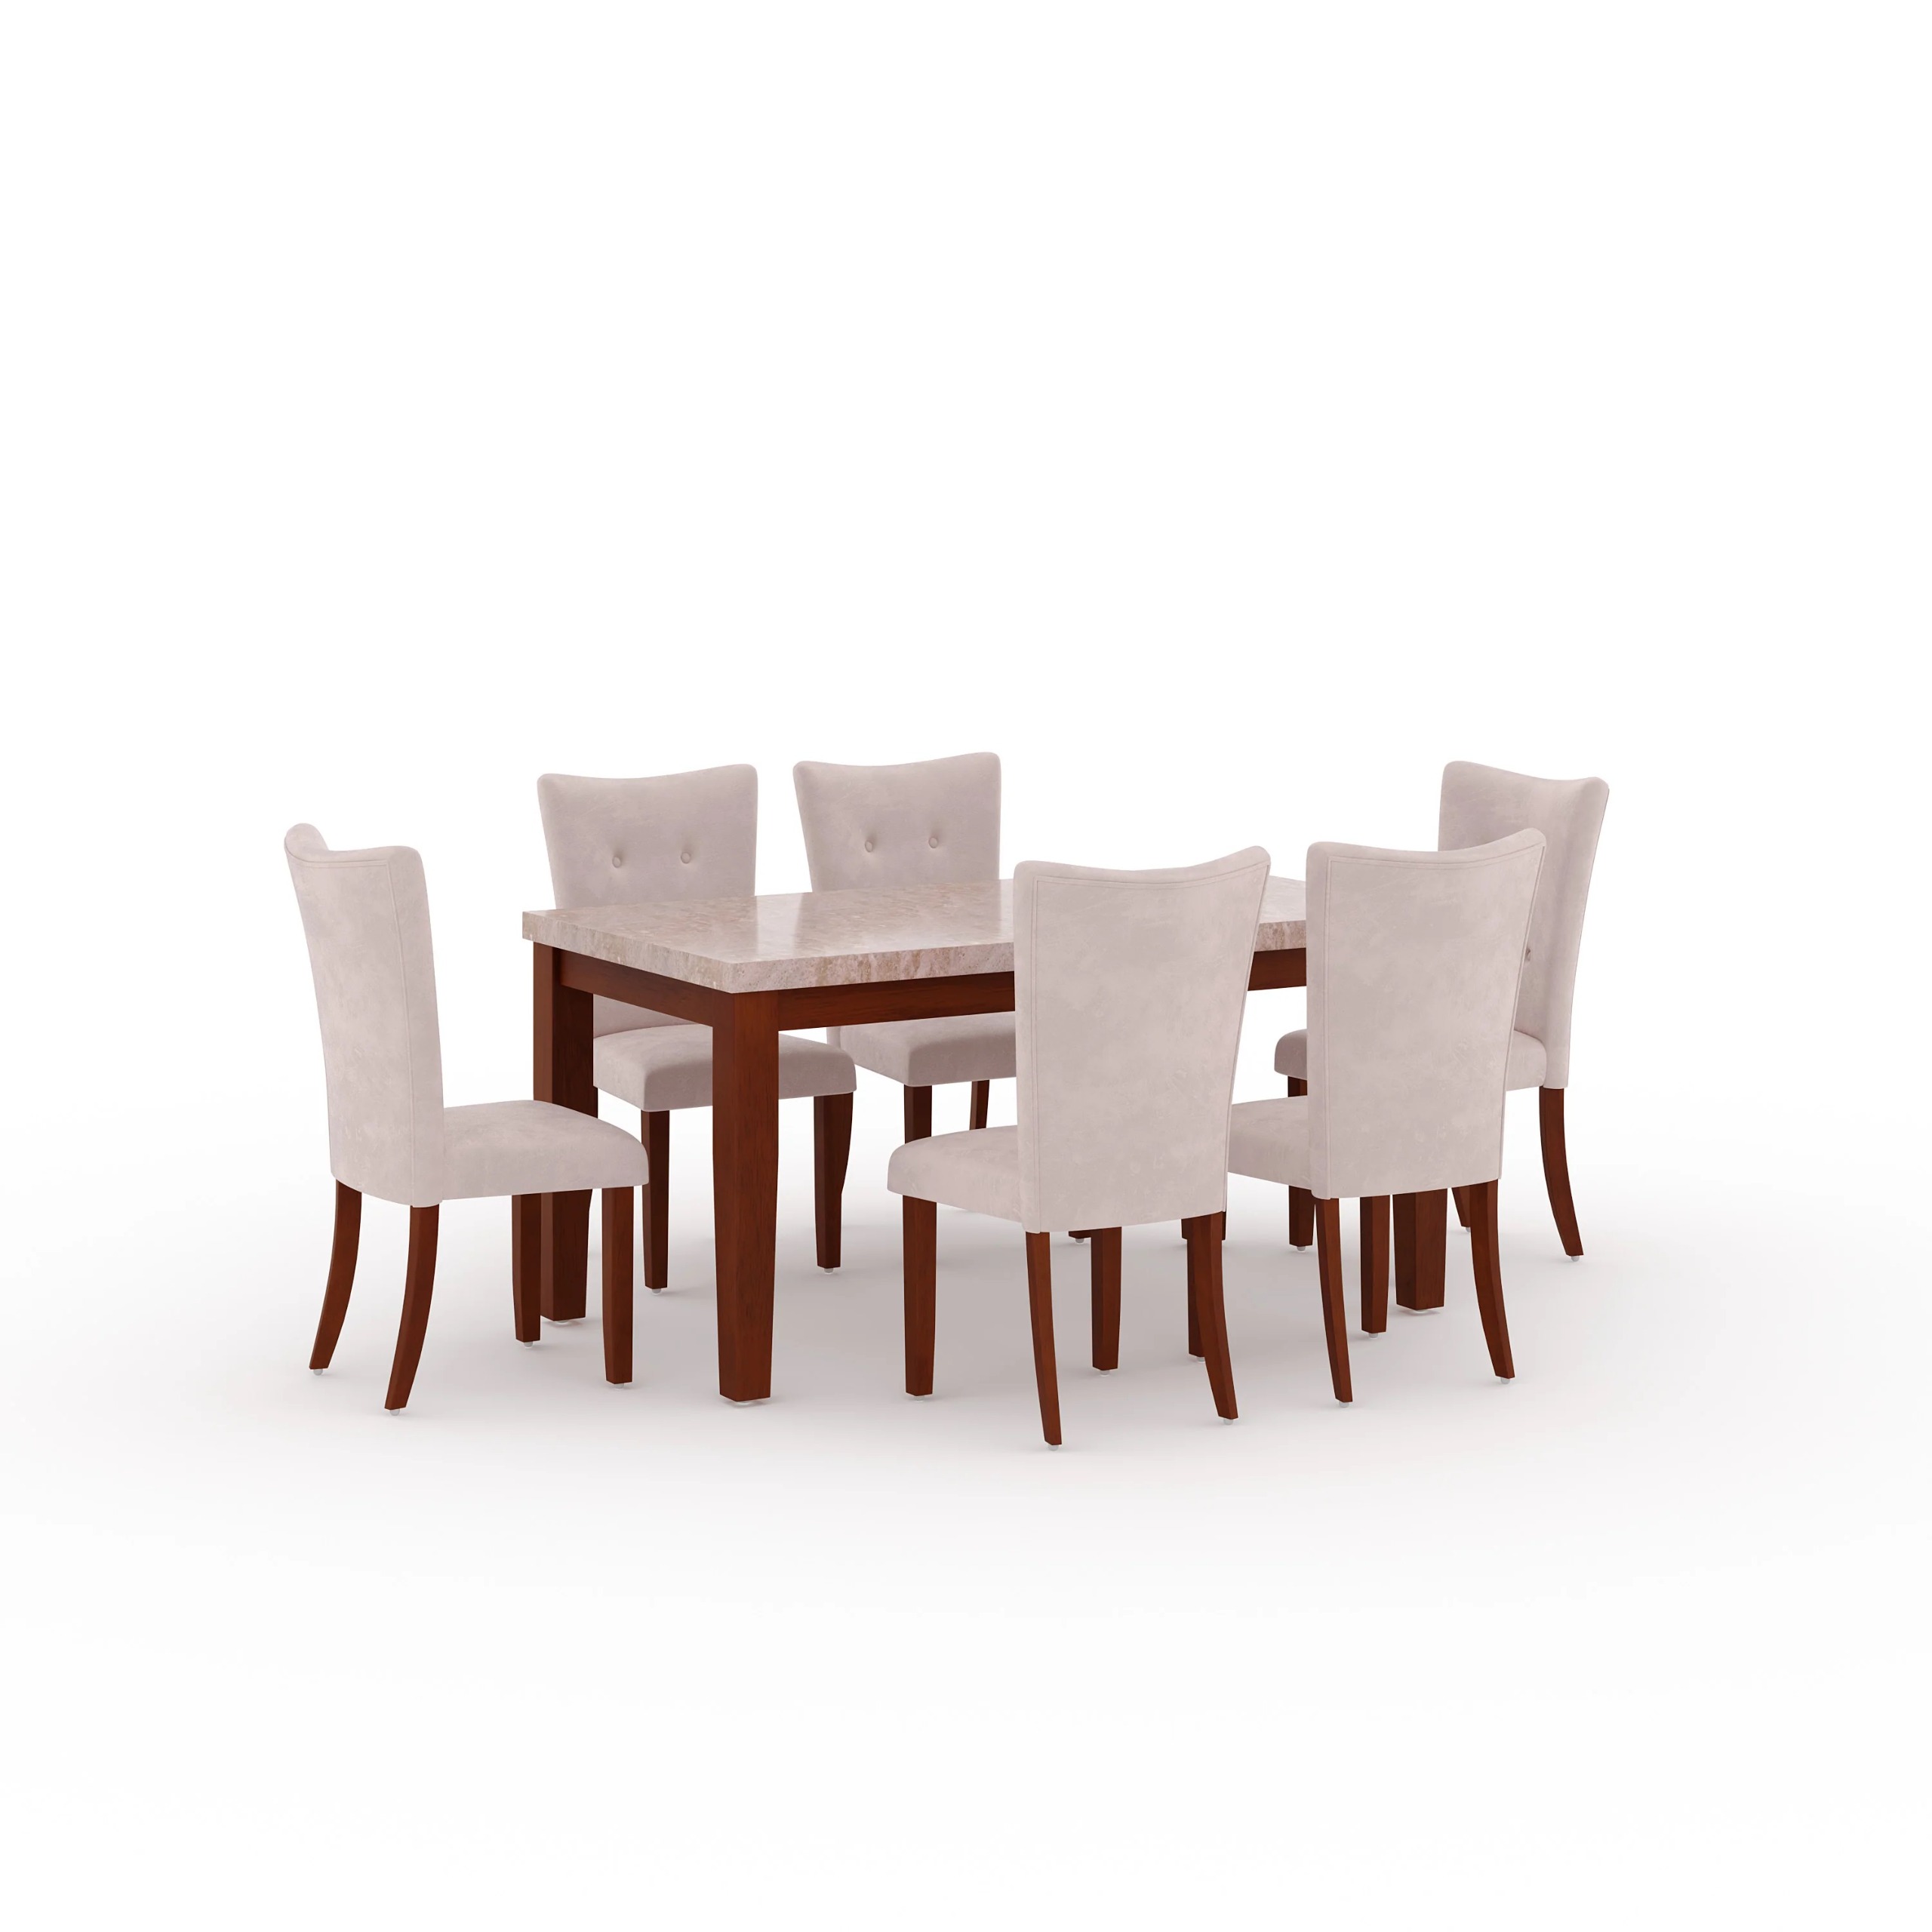 Werfo Anemone Solid wood 6-Seater Marble Top Dining Table With 6 Upholstery Chairs in Walnut Color